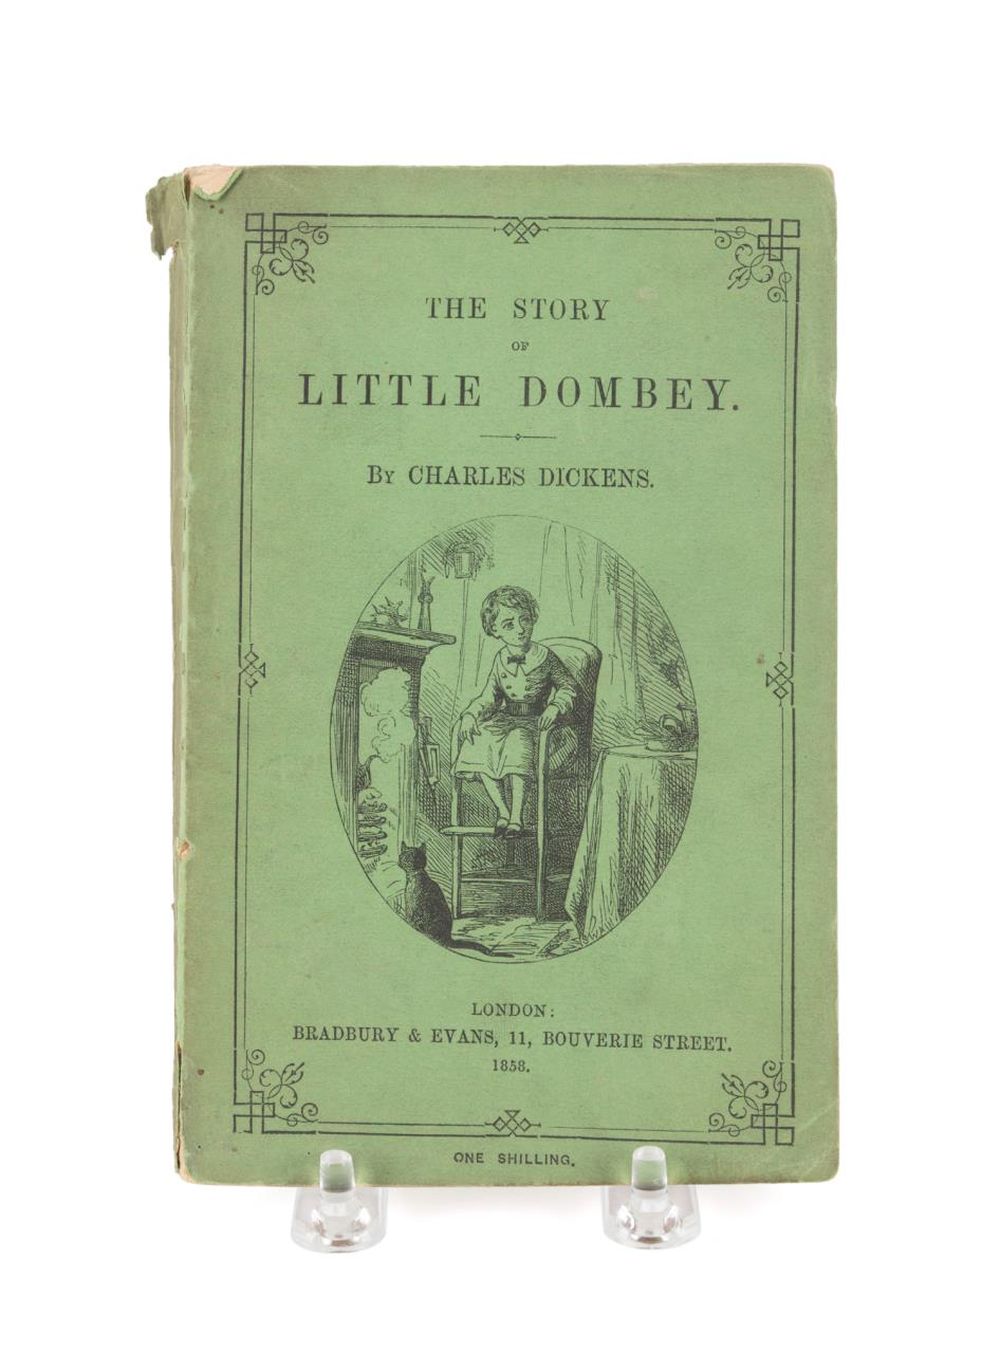 CHARLES DICKENS, THE STORY OF LITTLE